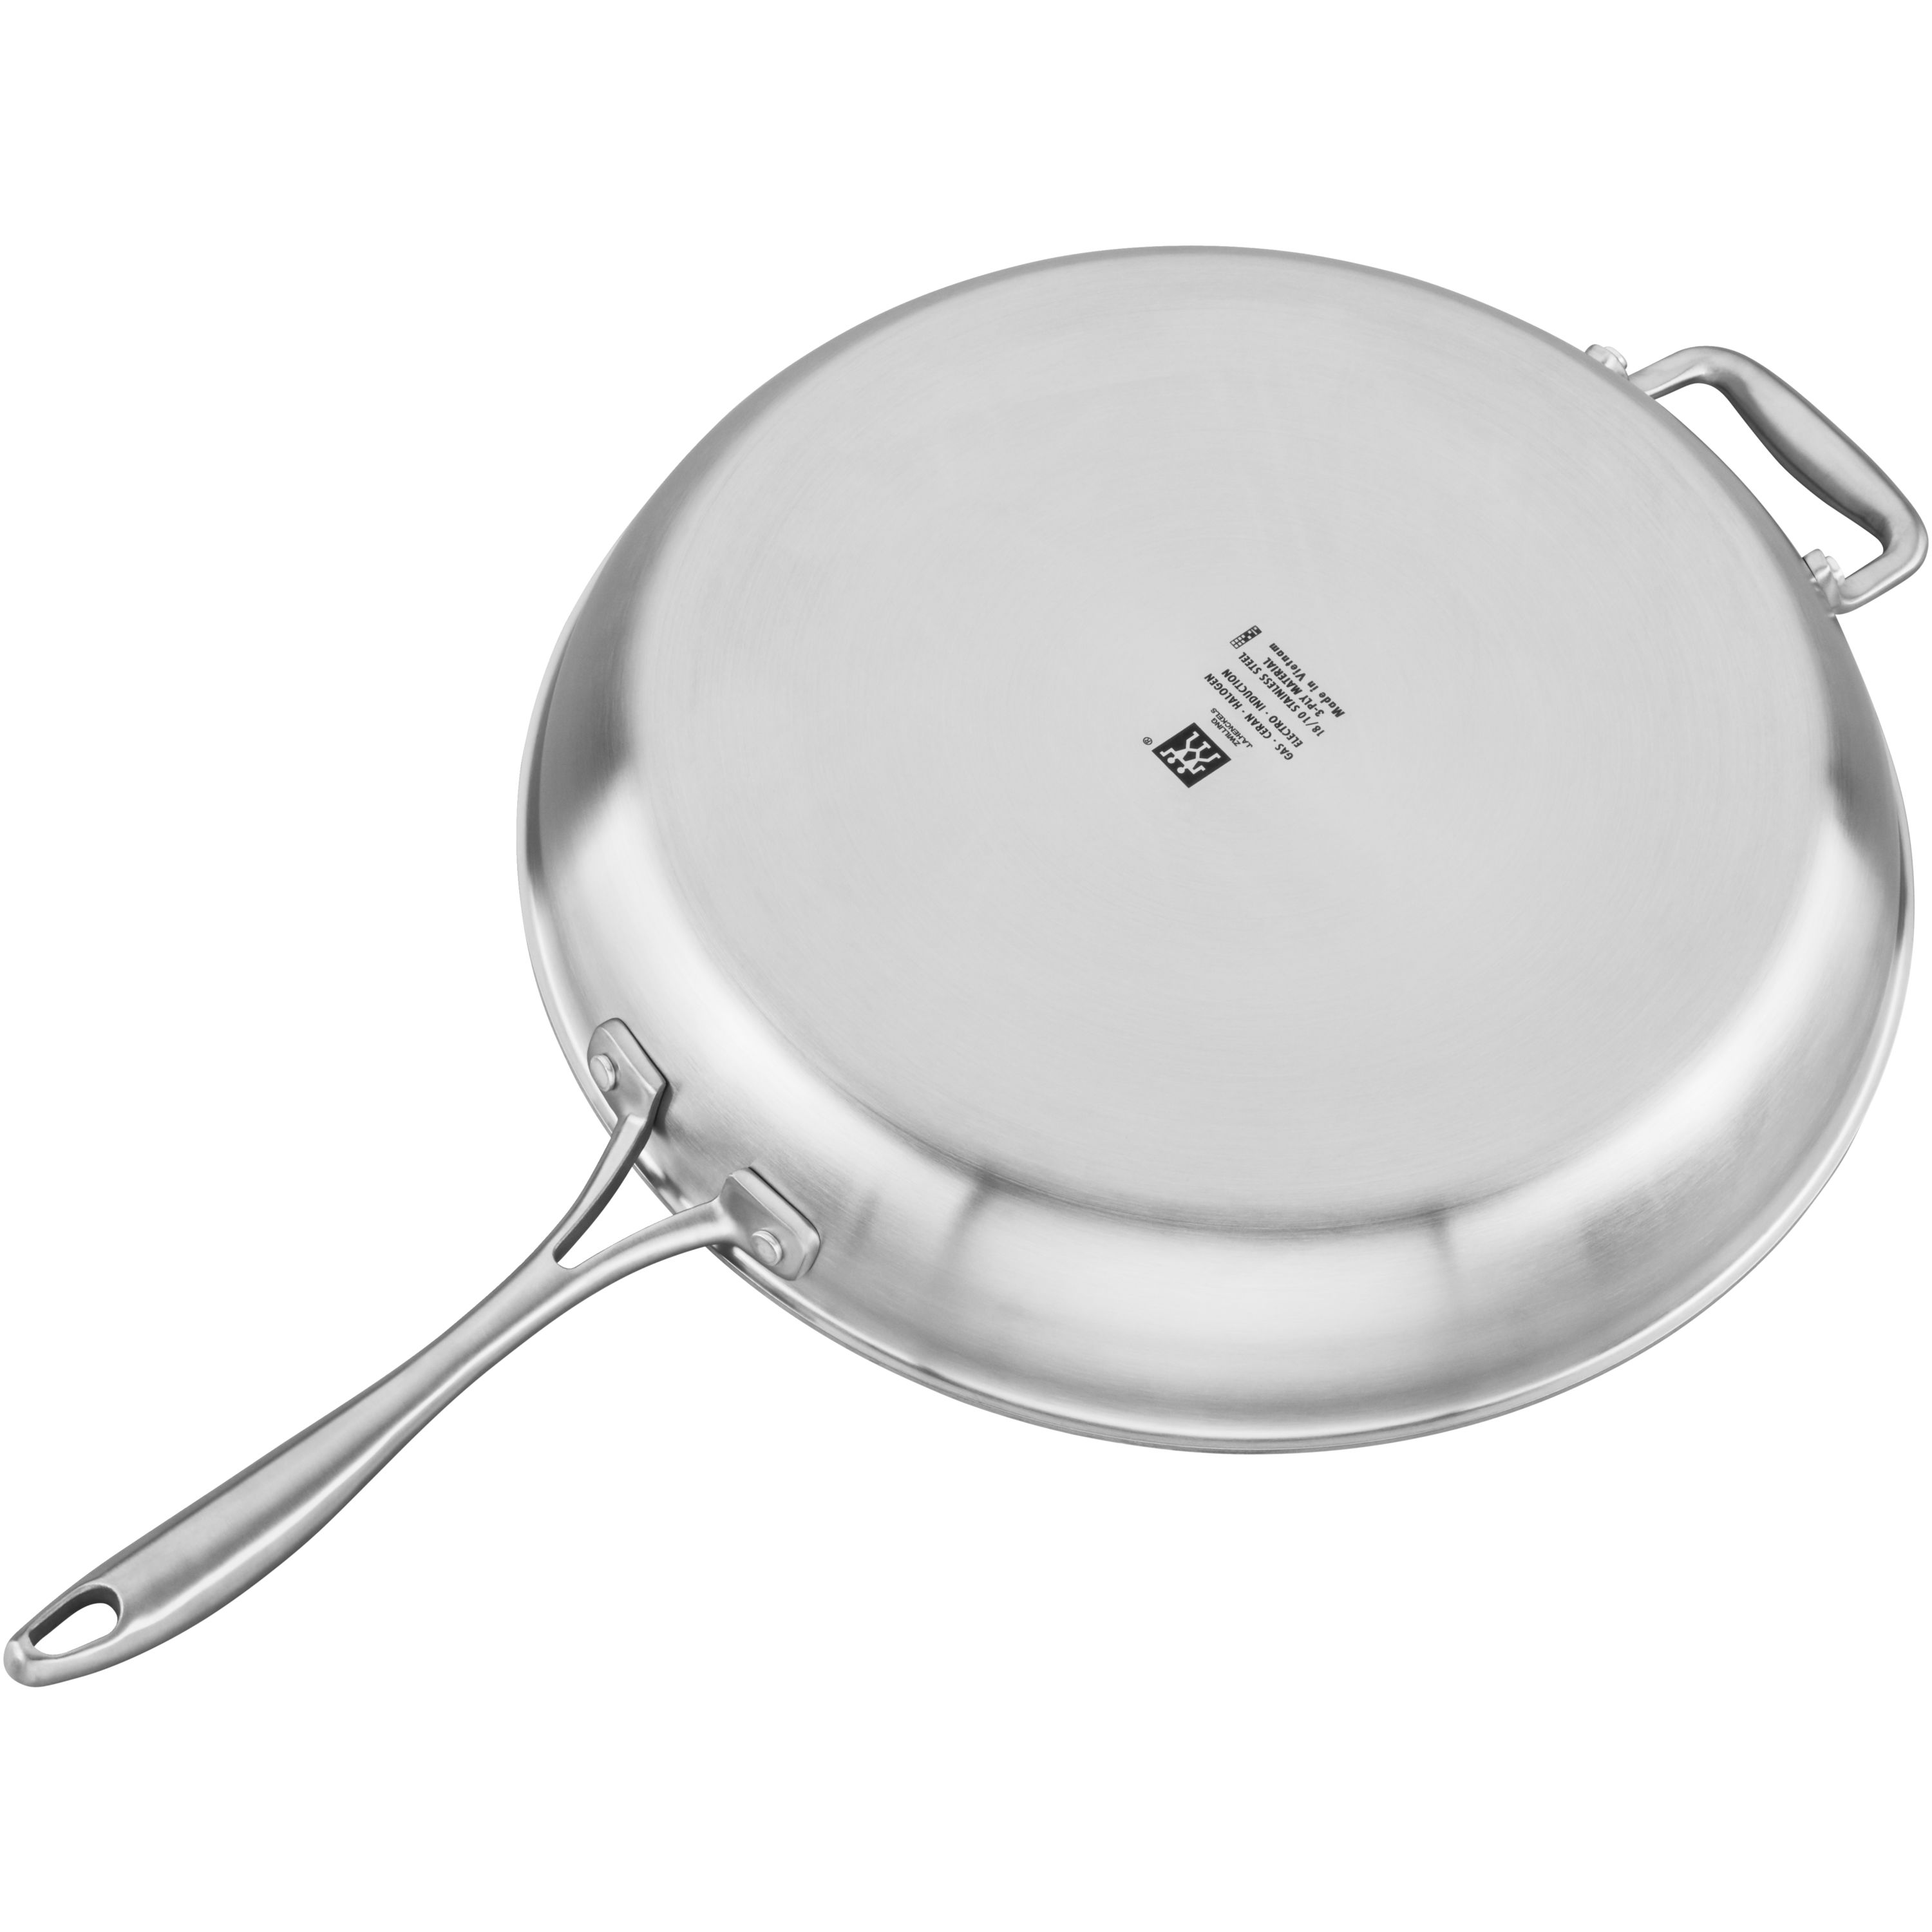 360 Cookware 8.5 inch Fry Pan with Short Handles, Stainless Steel, Oven Safe, Ergonomic Handles